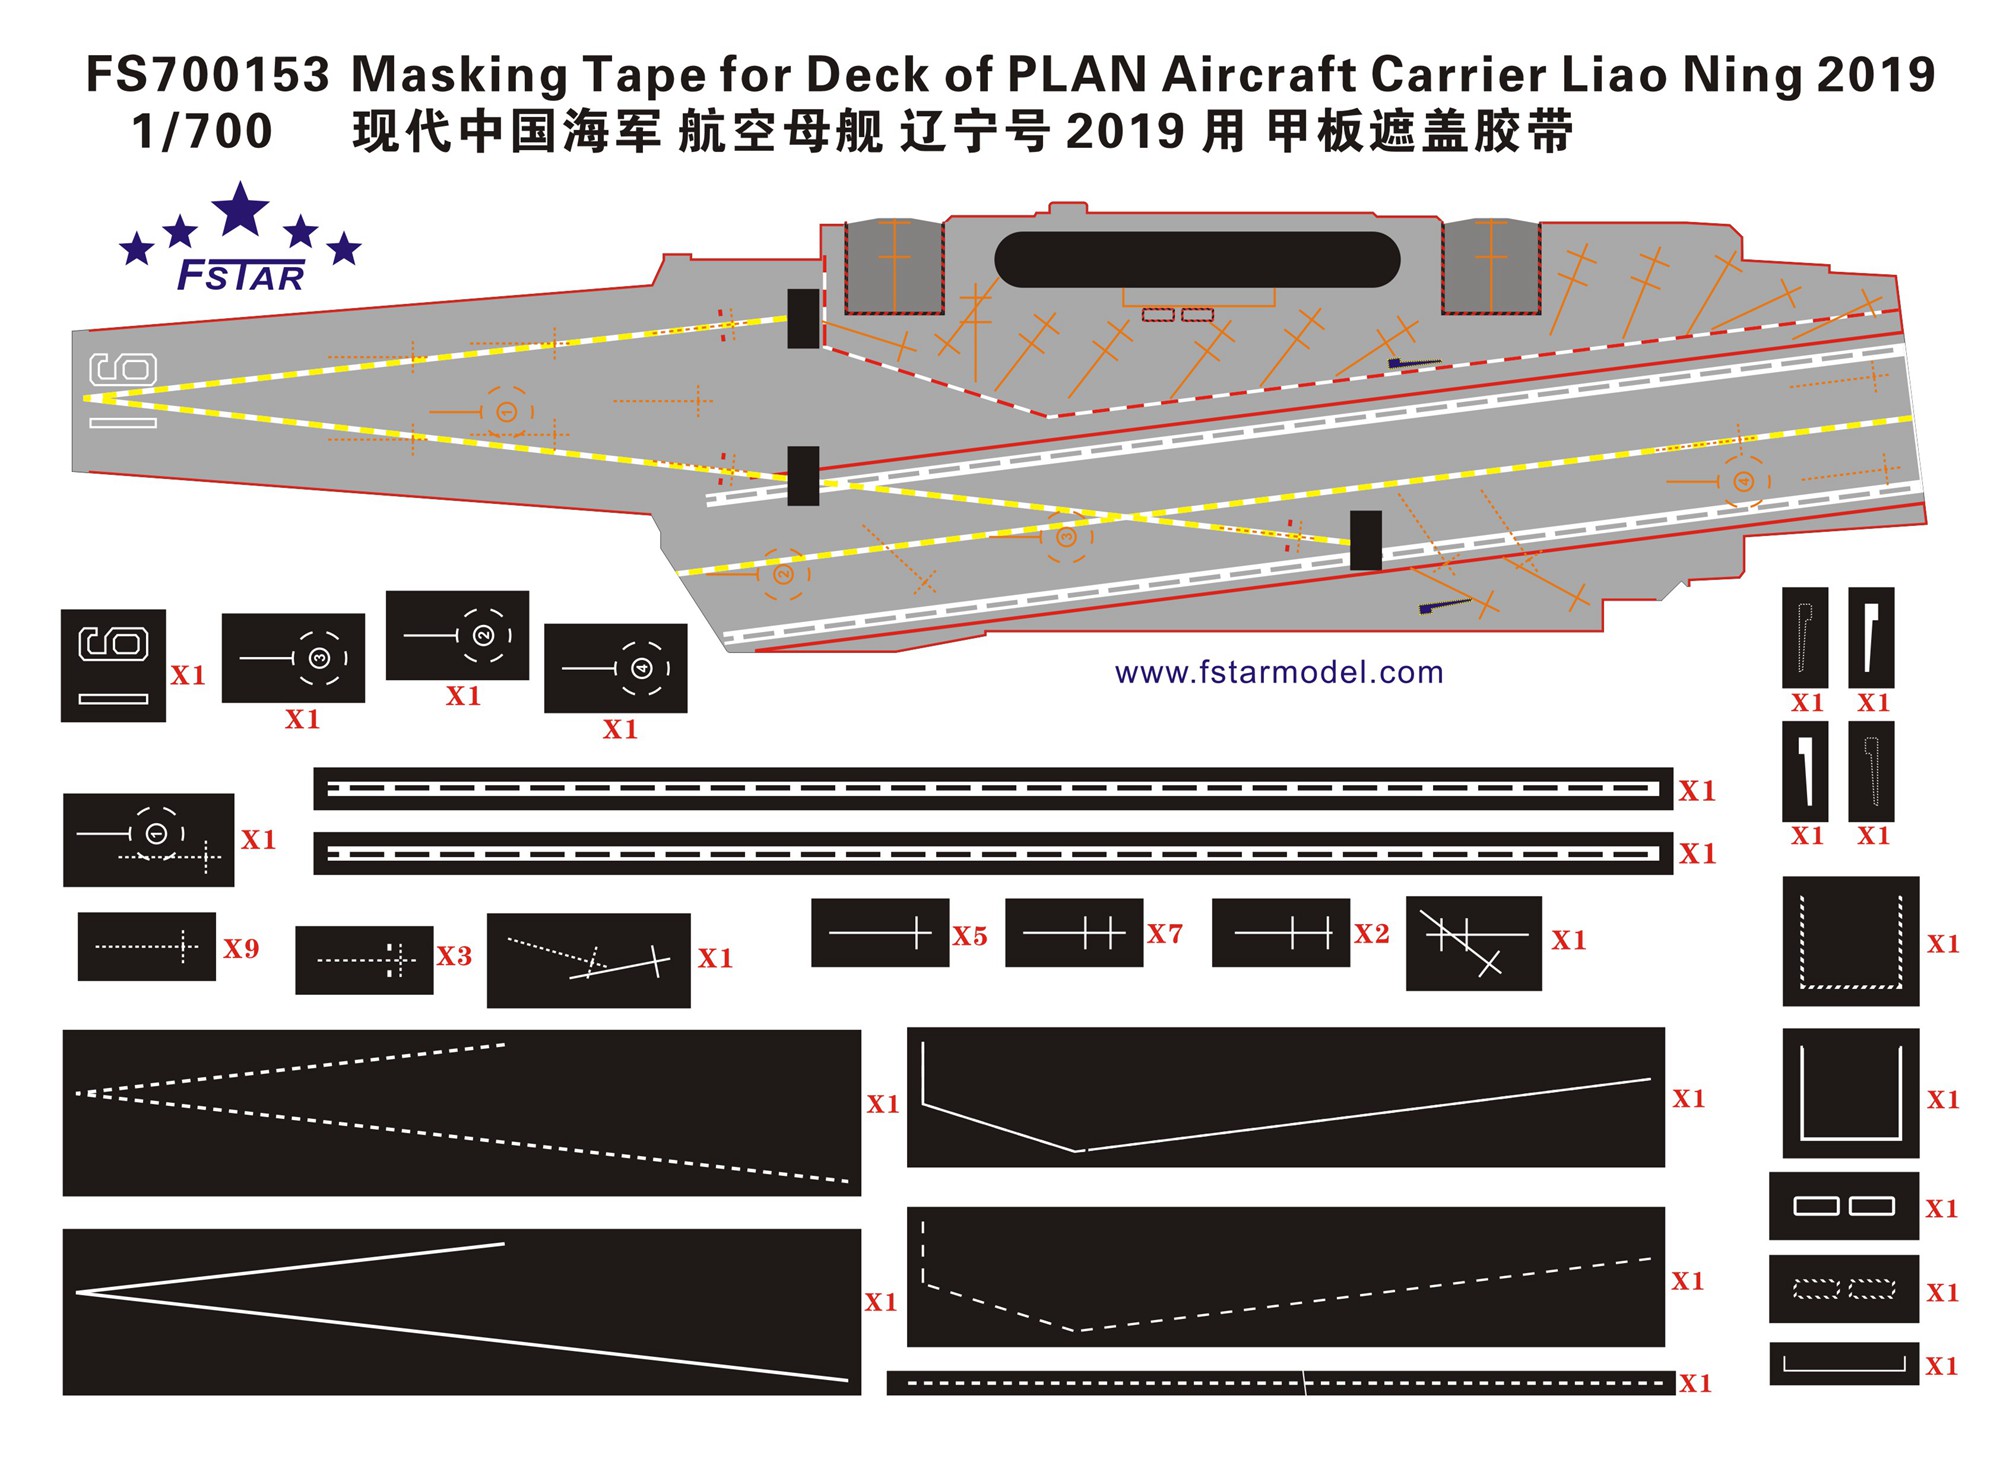 1/700 Masking Tape for Deck of Aircraft Carrier Liao Ning 2019 - Click Image to Close